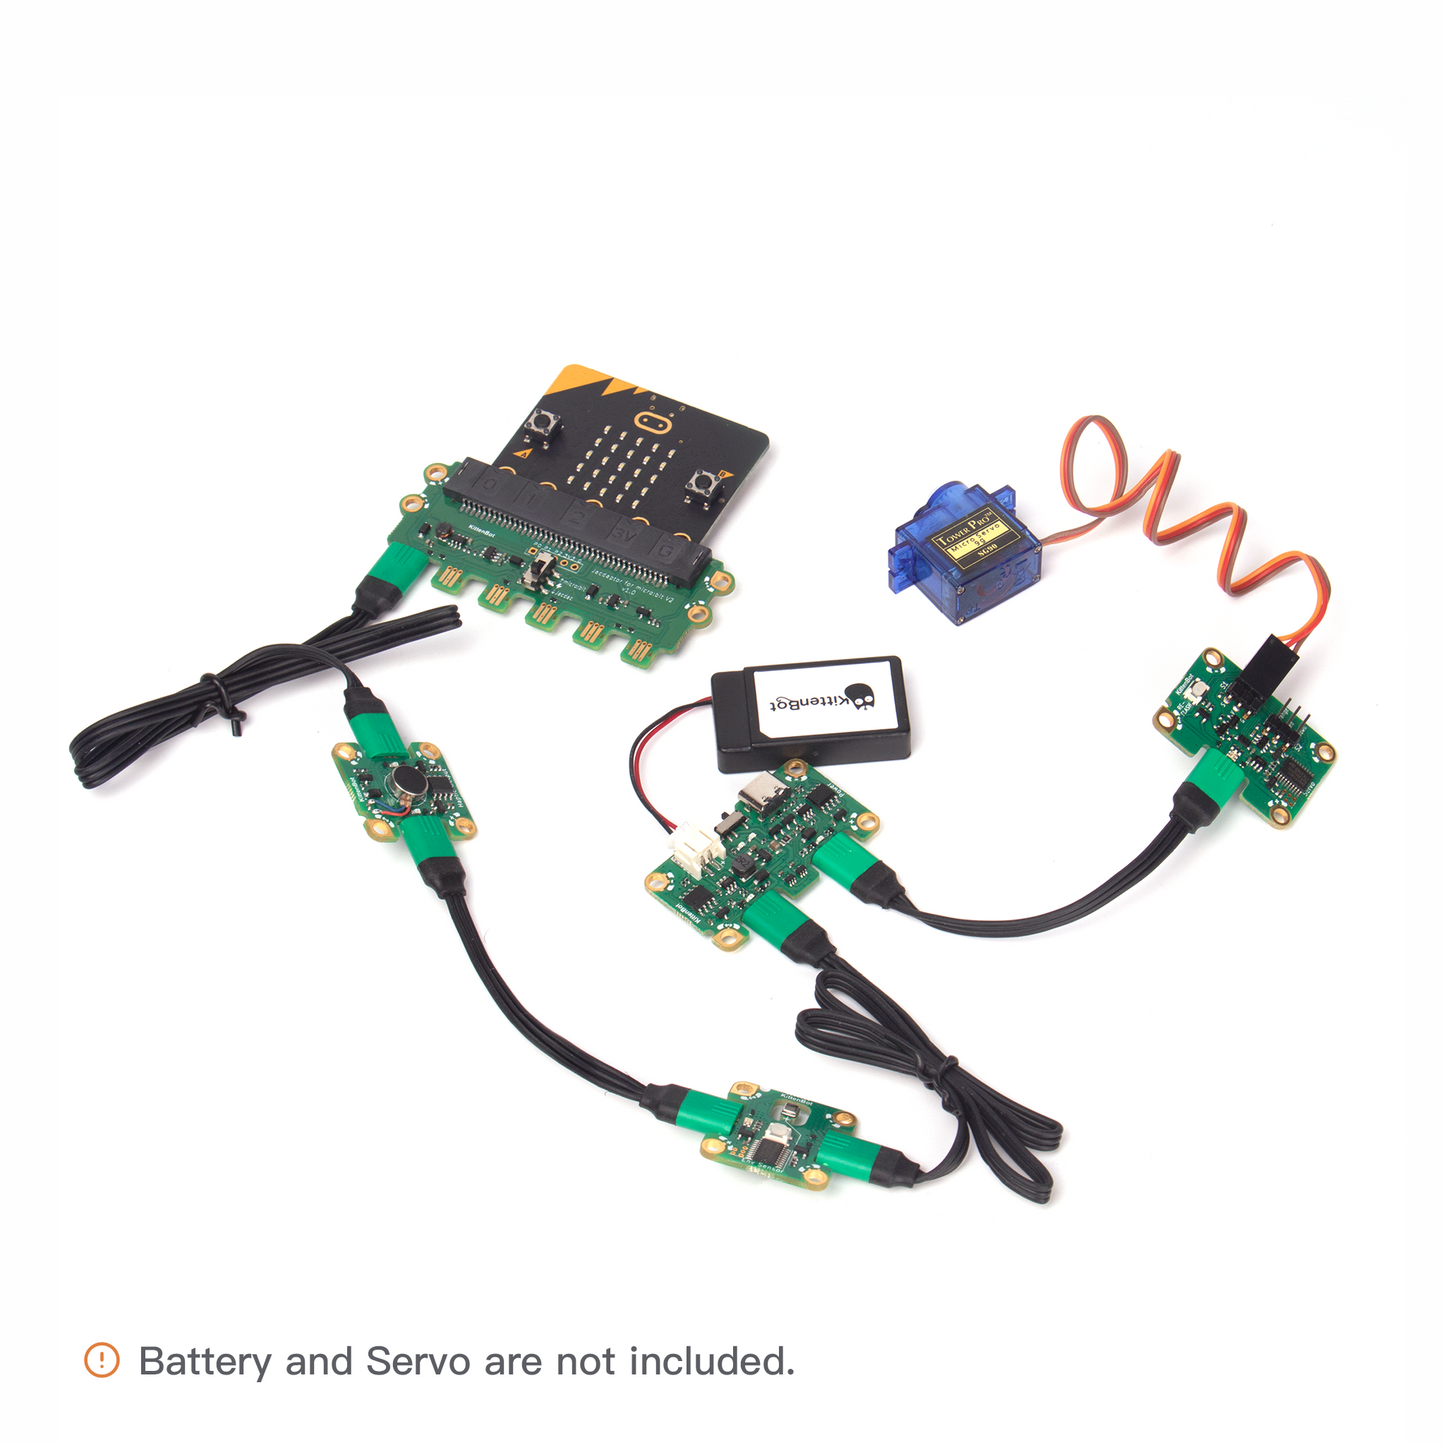 Jacdac Electronic Kit B for Developer (Including Jacdac cables)